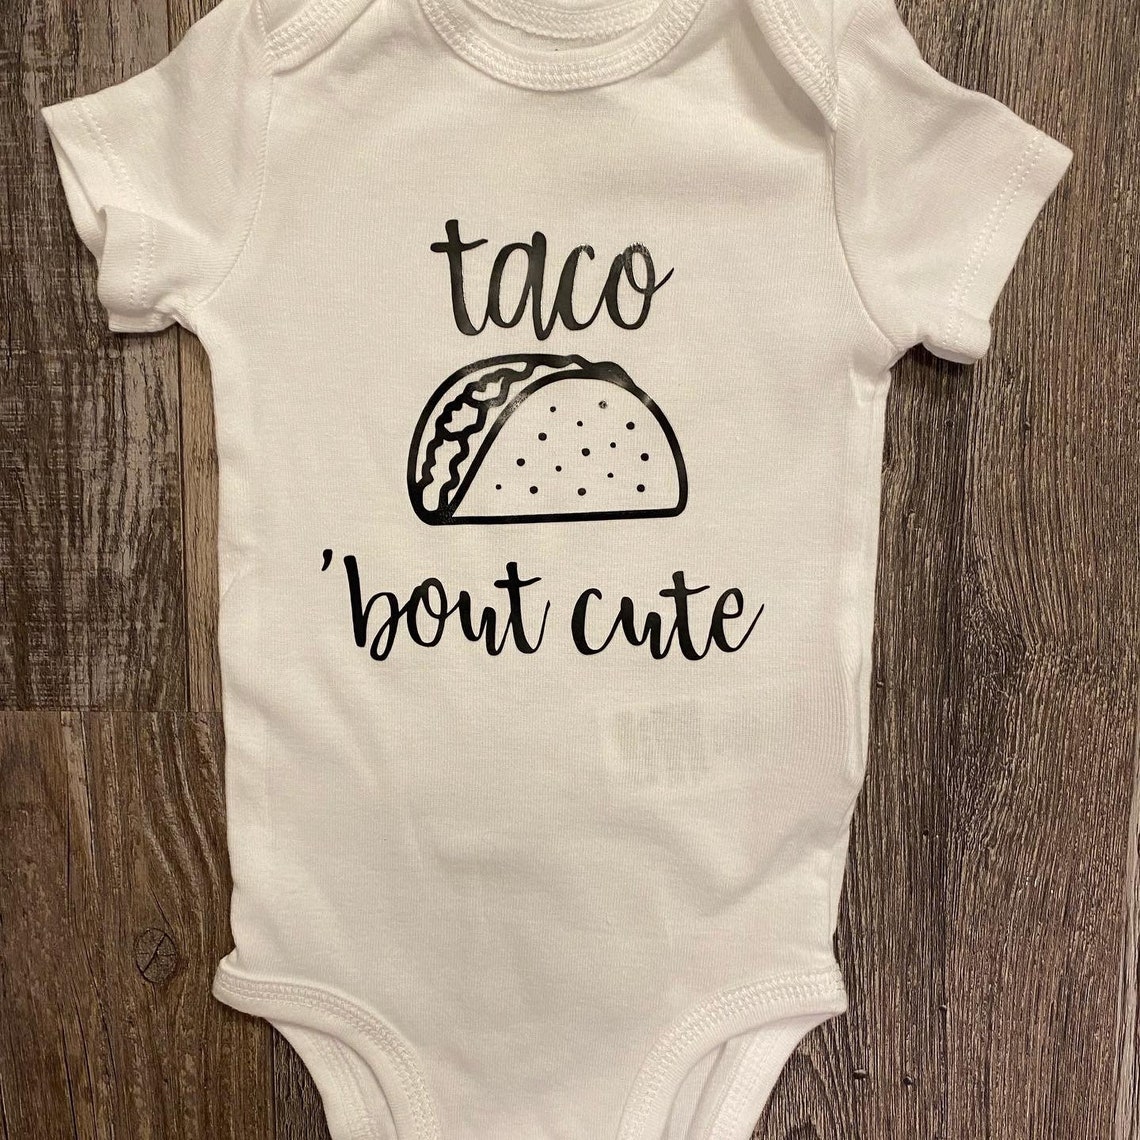 Taco Bout Cute Baby Onesie Baby Onesie Personalized | Etsy